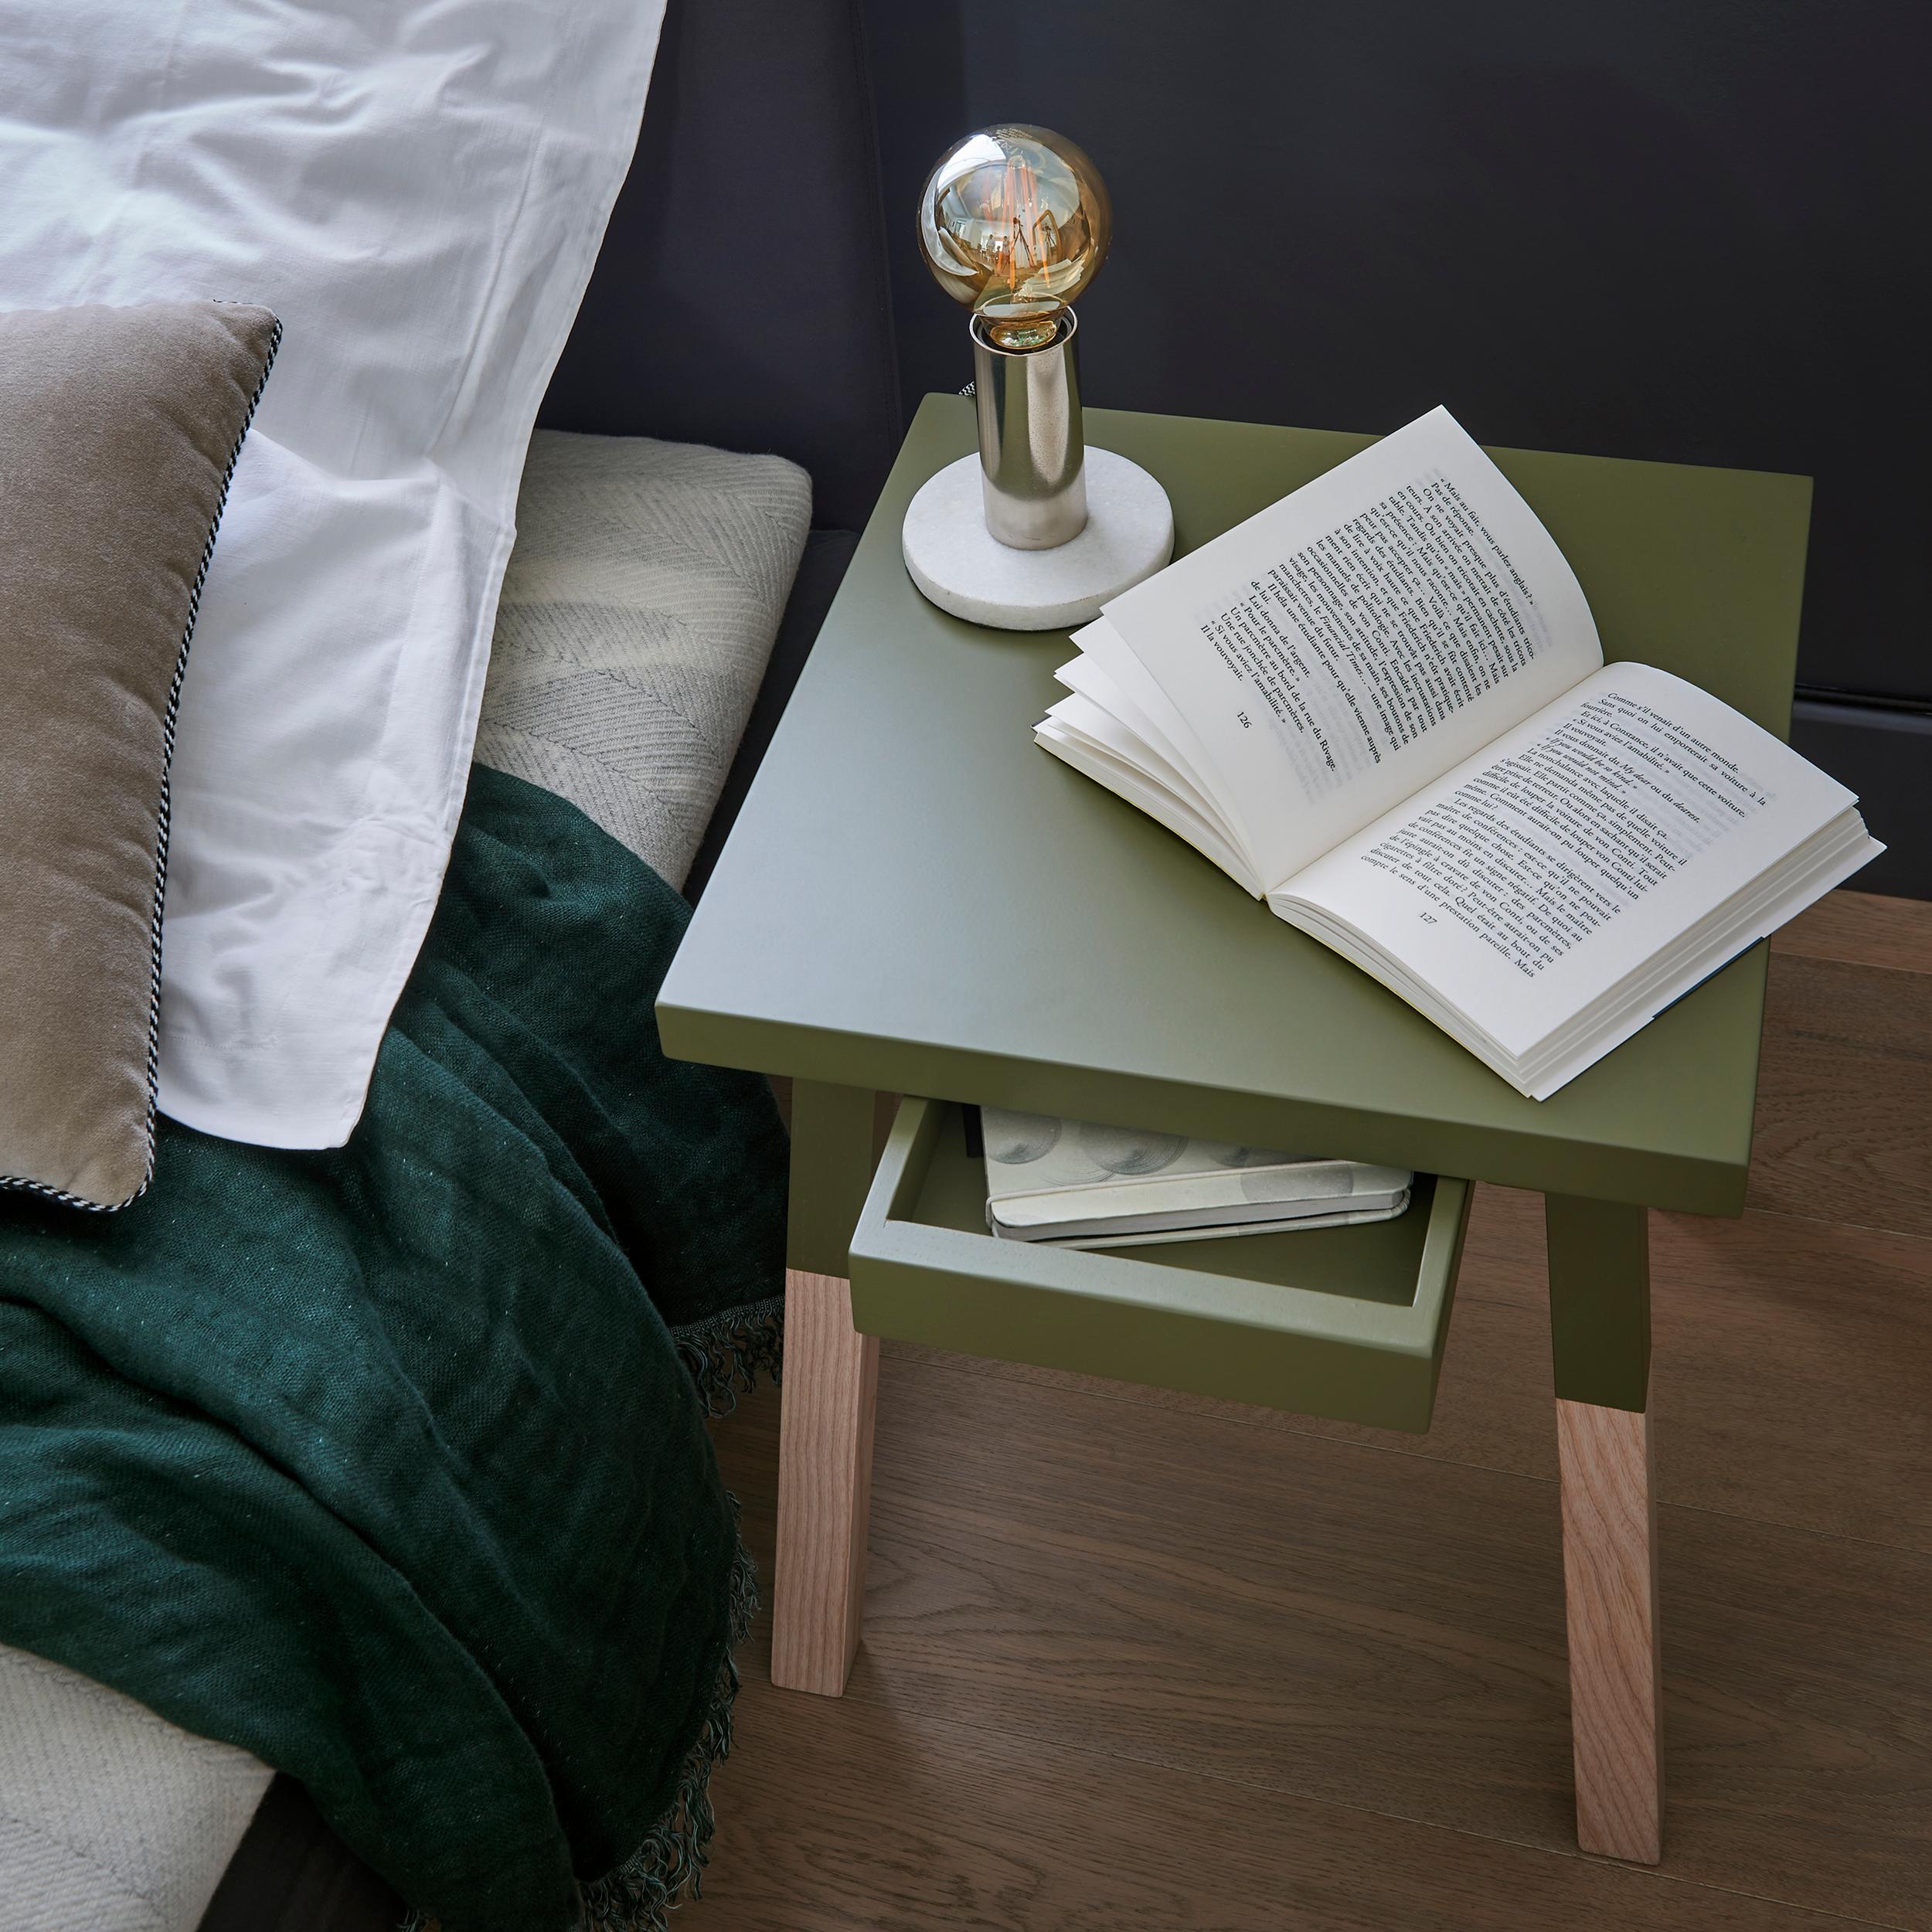 Pair of 2 square bedsides tables with a wooden drawer under the top.

Measures: Top side: 40 cm / 15.75''
Weight 5 kg / 11 lbs each
Displaid Price is for 2 bedsides tables

Mon Petit Meuble Français provides exclusively 100% Made in France